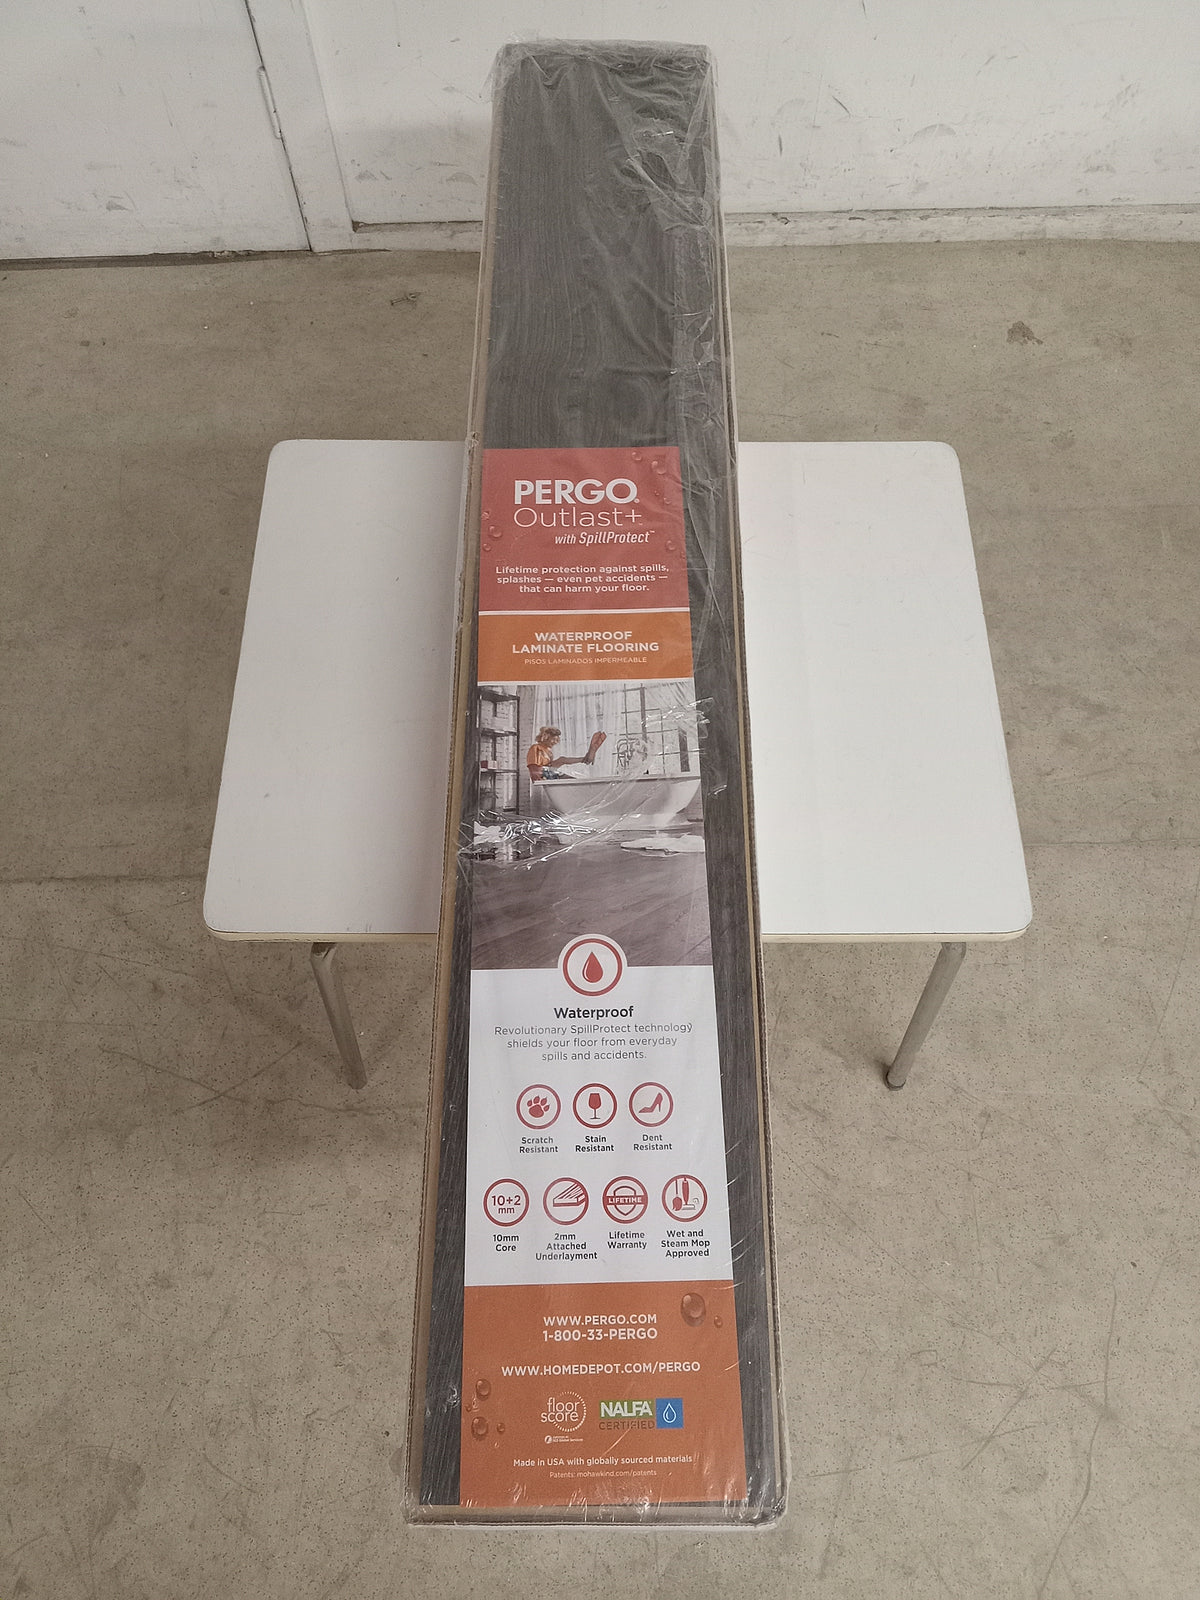 Pergo Outlast with Spill Protect Waterproof Laminate Flooring